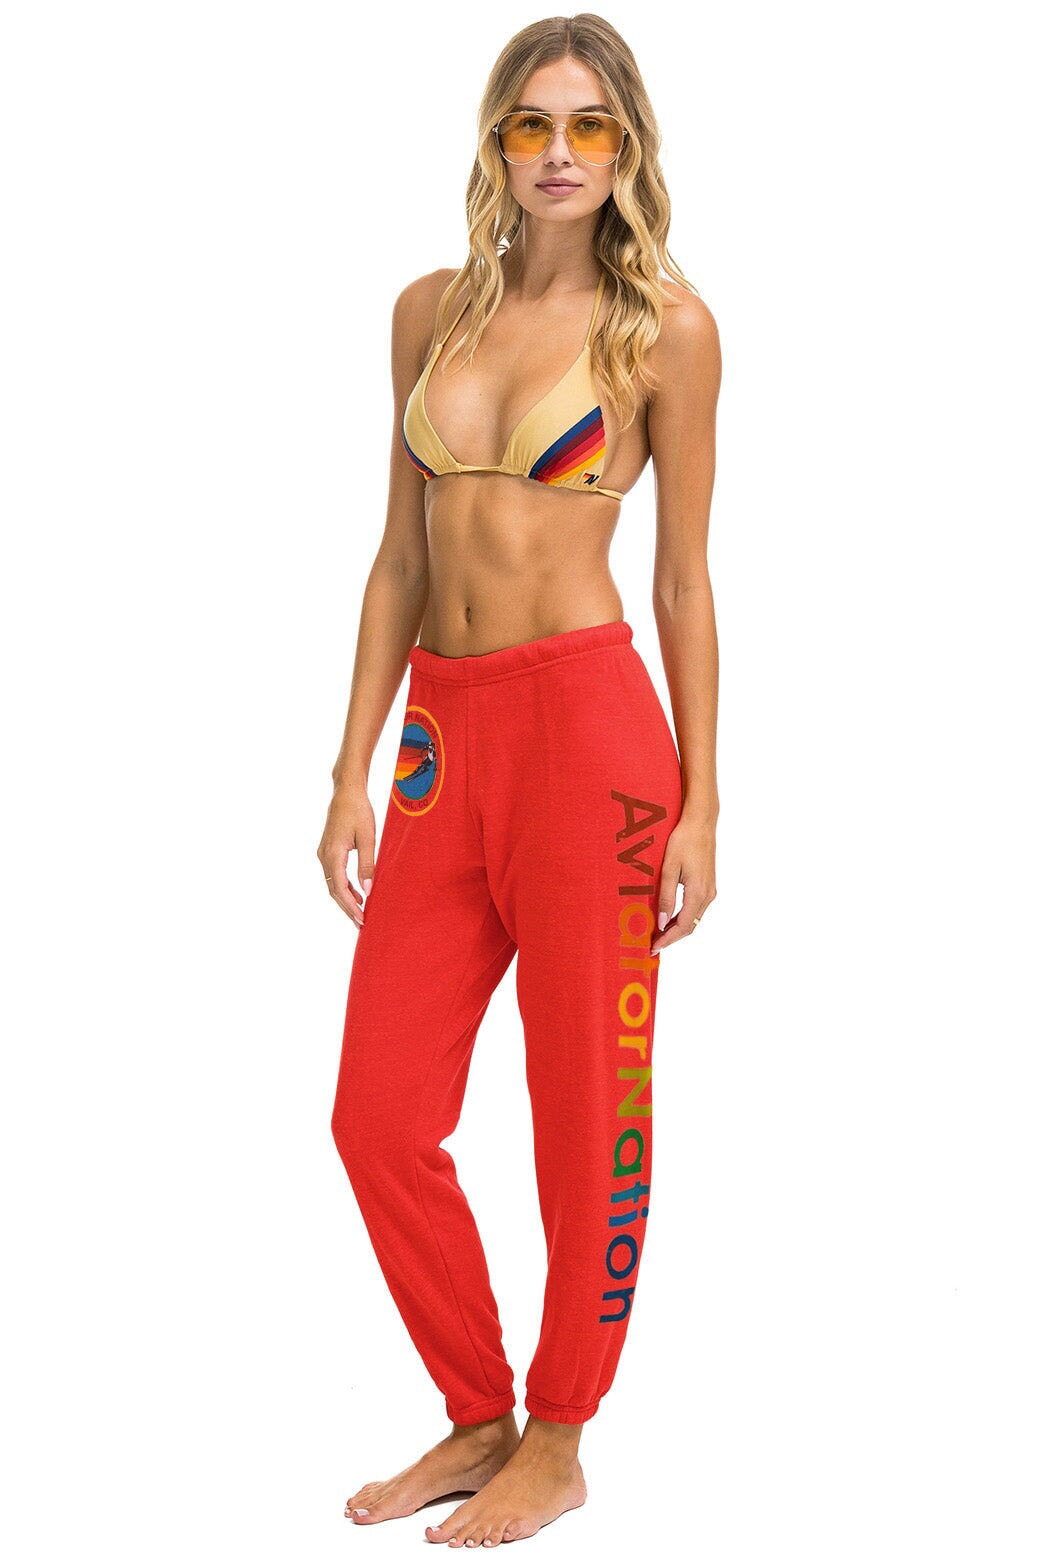 AVIATOR NATION VAIL SWEATPANTS - RED Women's Sweatpants Aviator Nation 